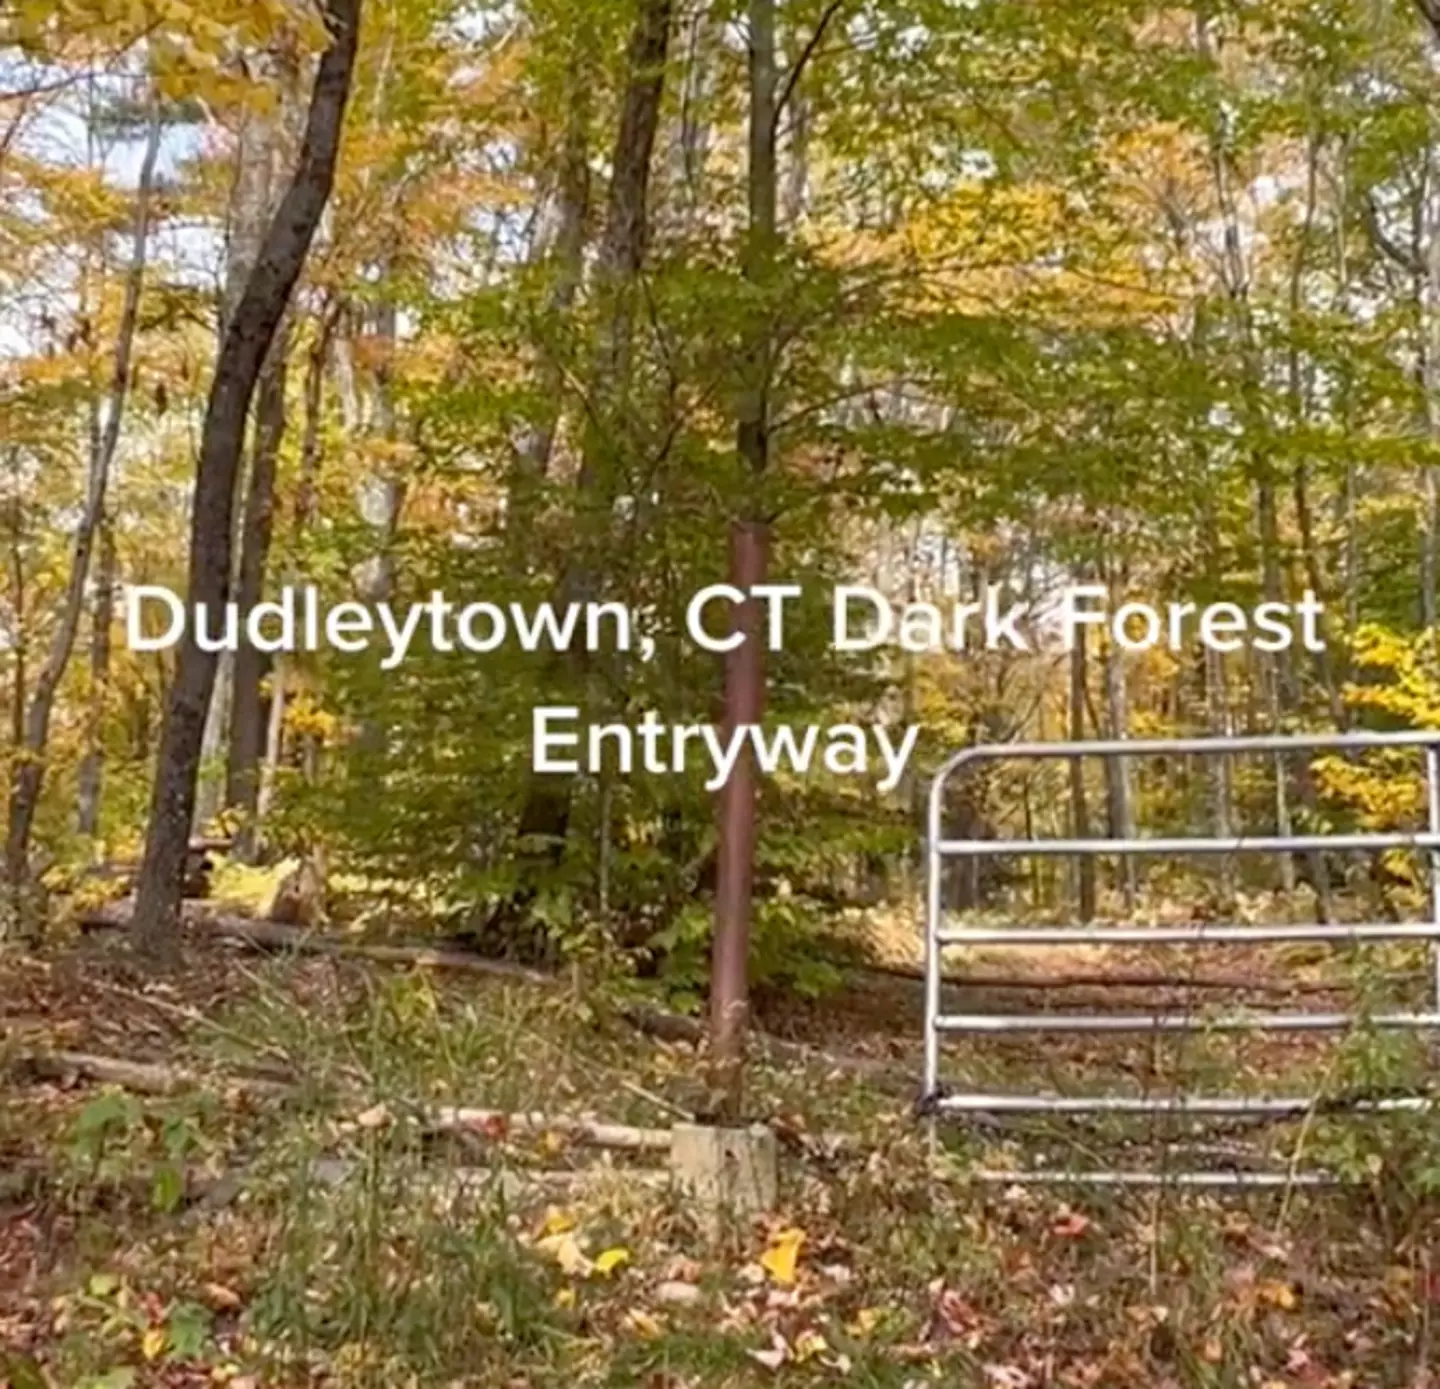 Dudleytown is located in Cornwall, Connecticut.